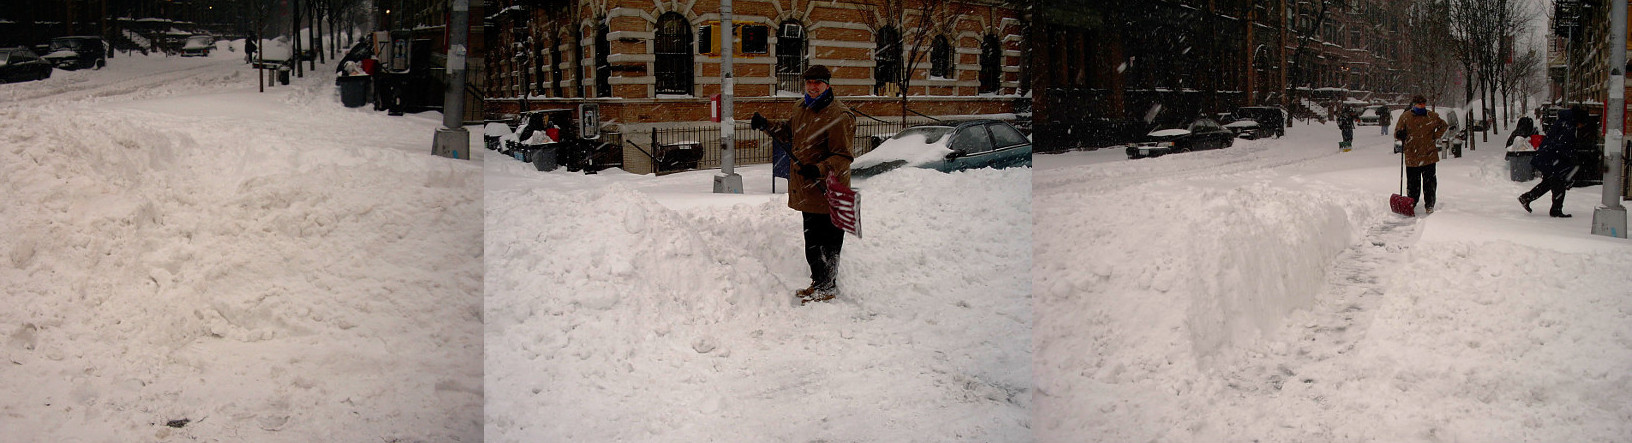 Clearing Snow for Pedestrians